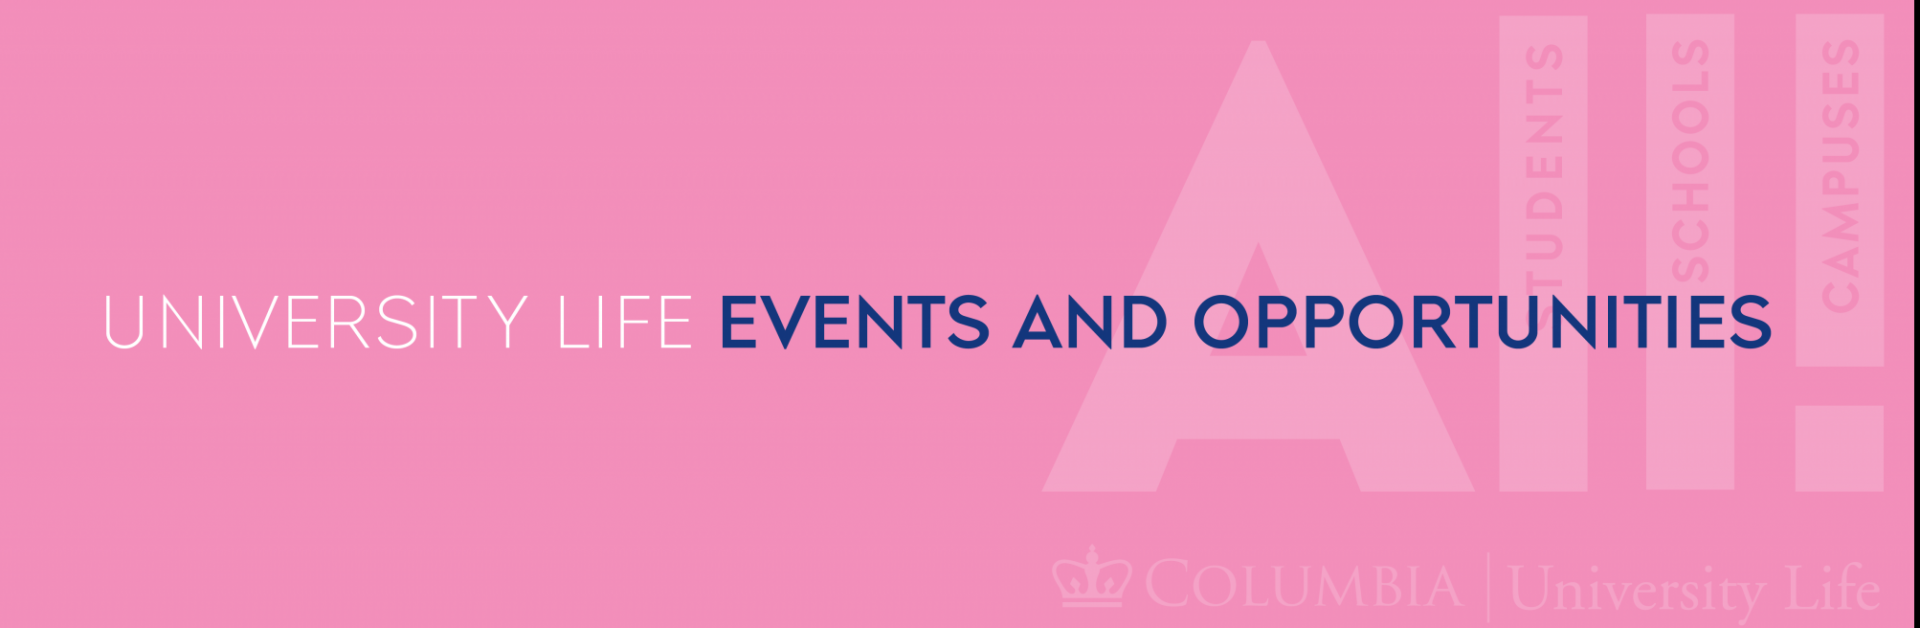 Events and Opportunities email banner